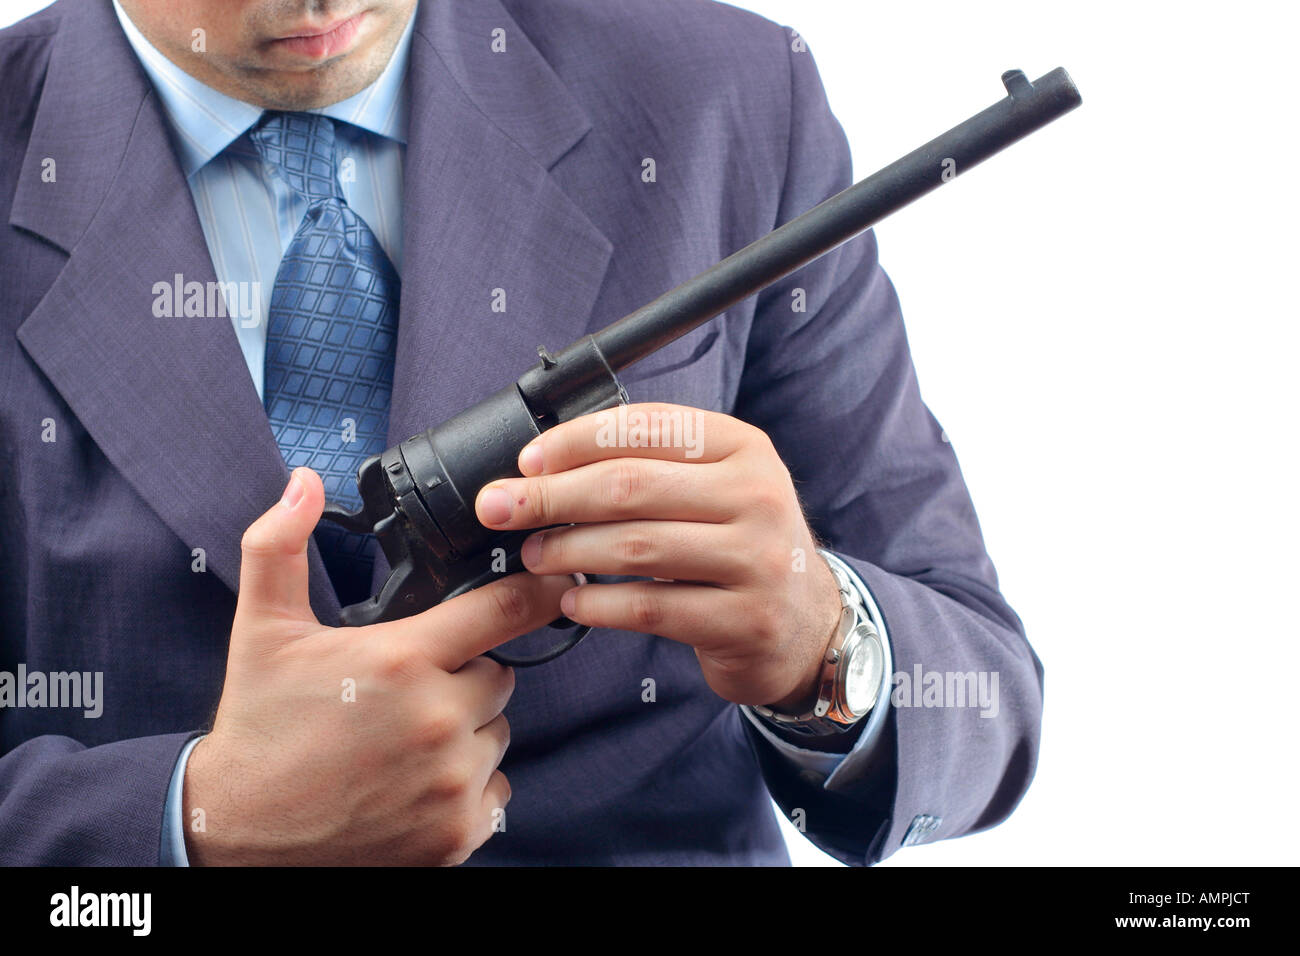 Person checking his weapon Stock Photo